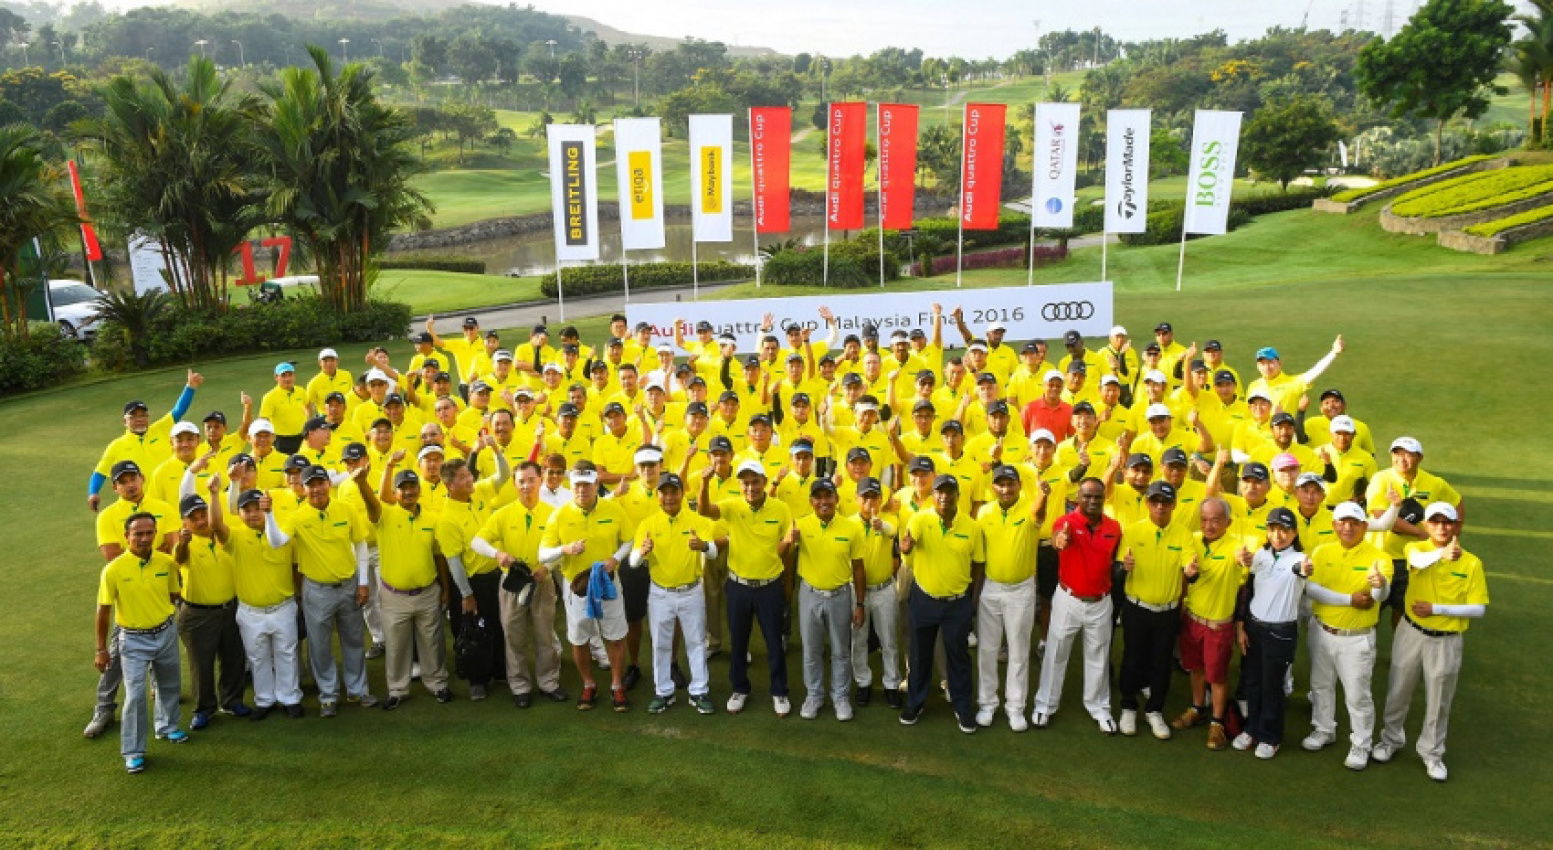 audi, autos, car brands, cars, golf tournament, tournament, the audi quattro cup 2017 to be held at mines resort & golf club